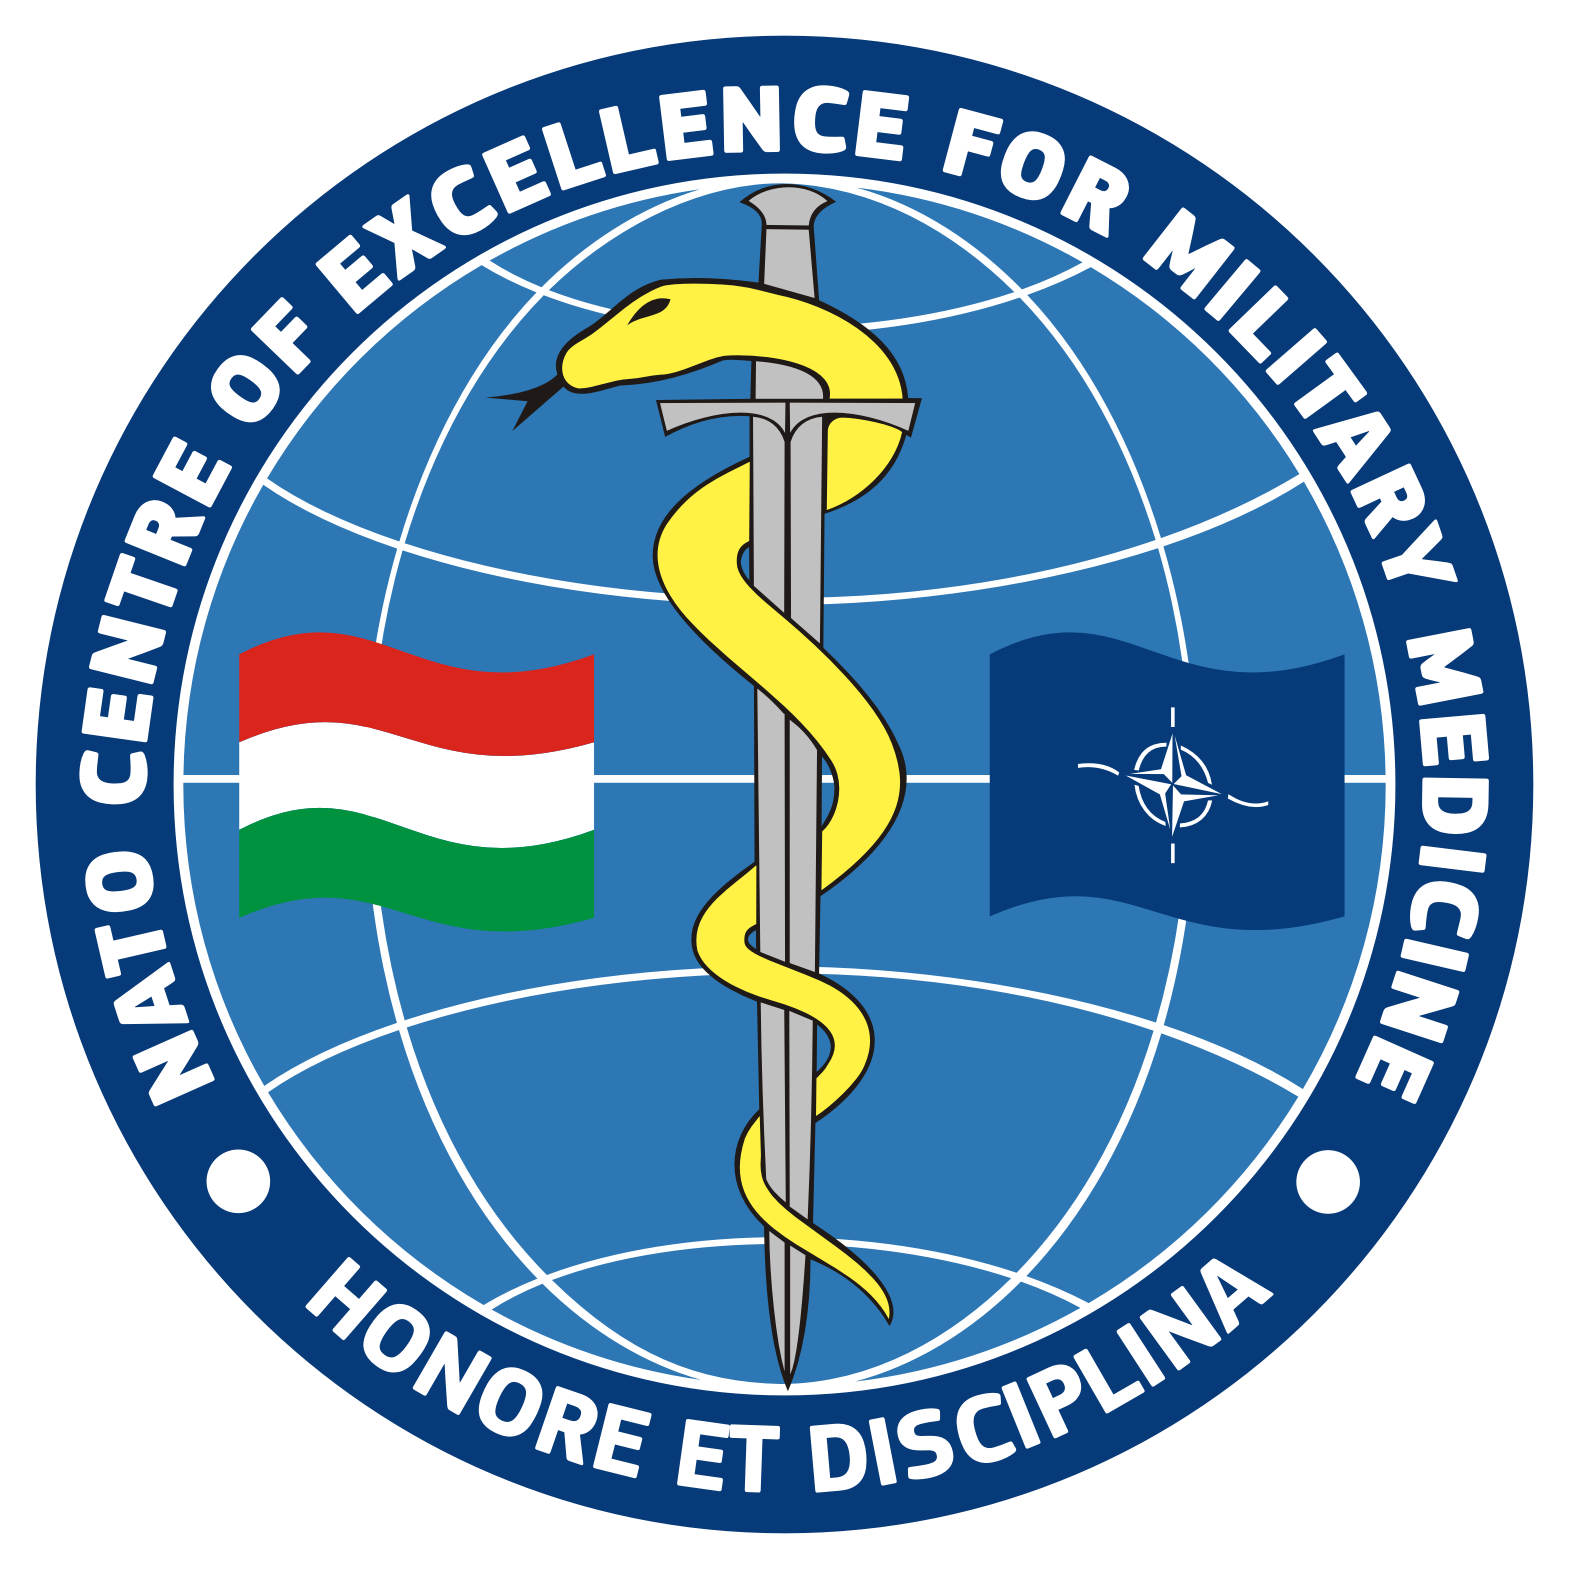 Military Medical Journals and other sources of information